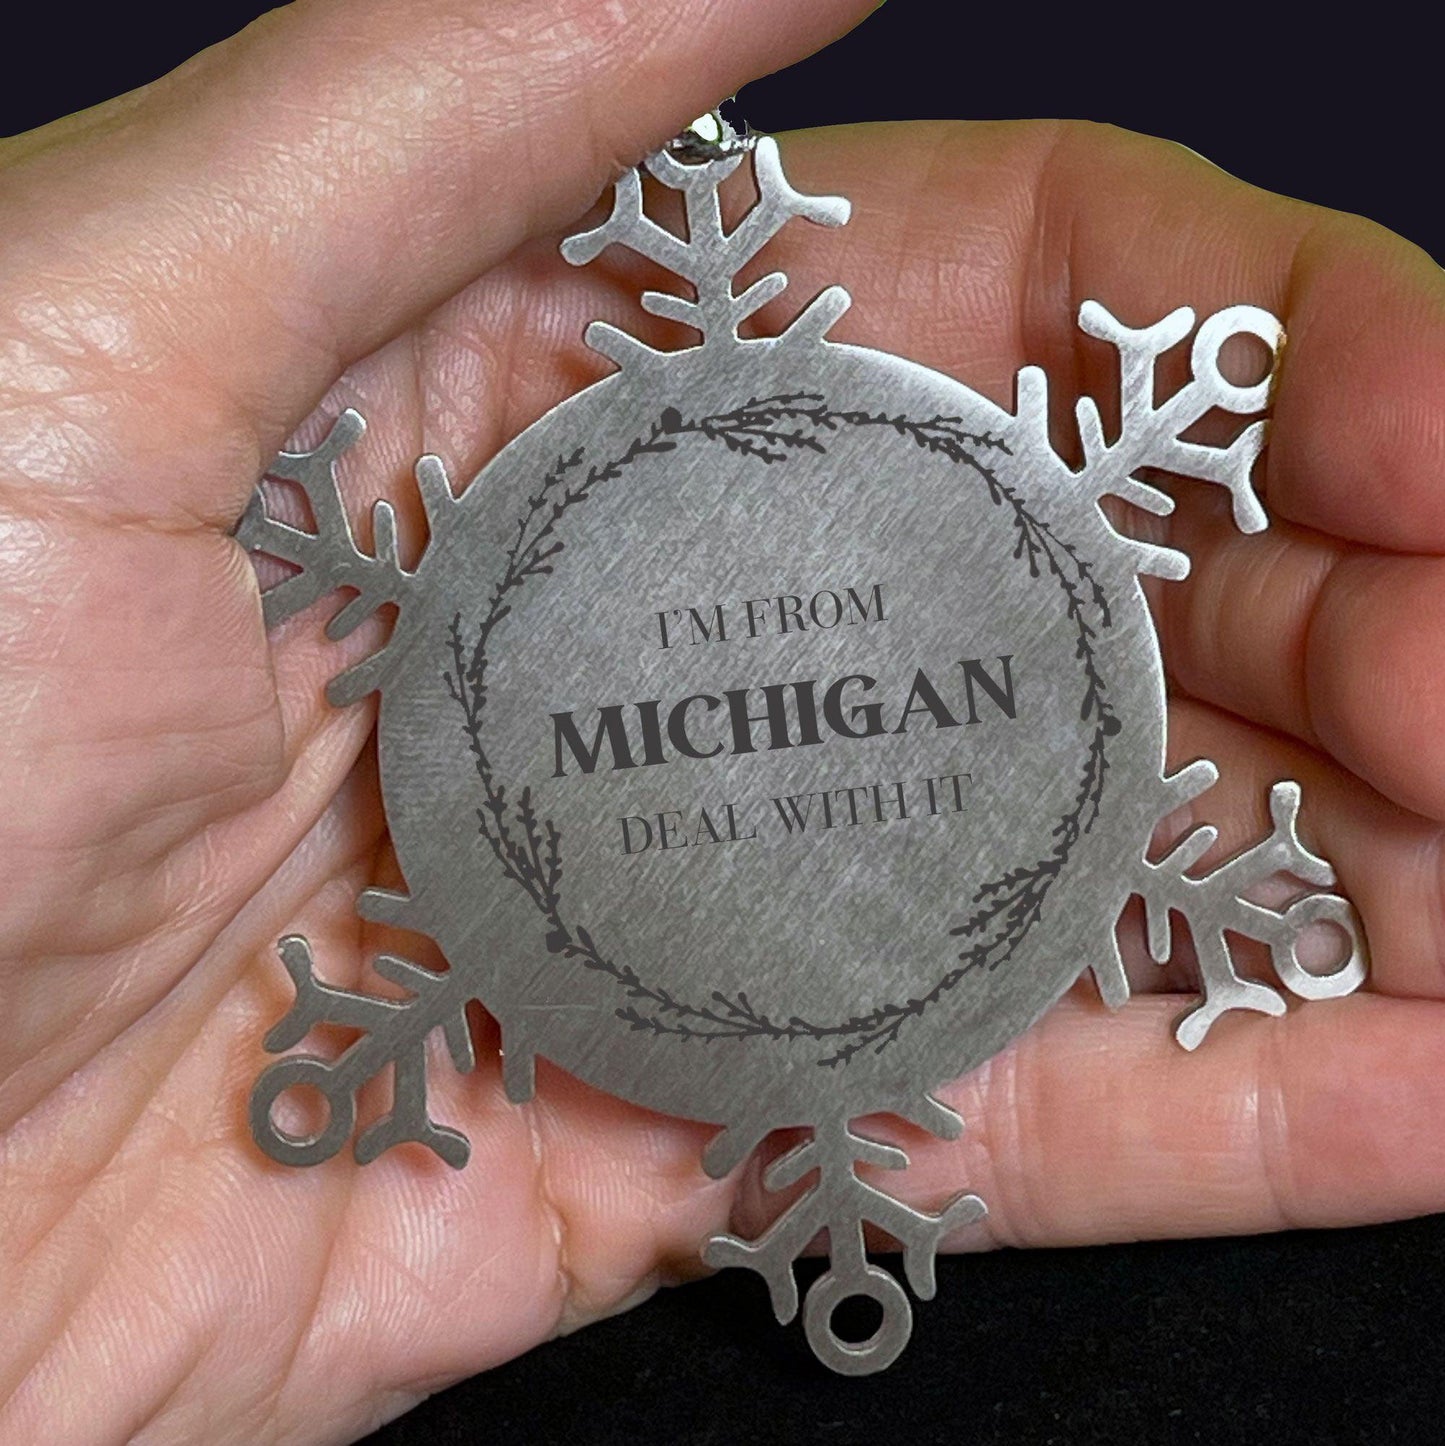 I'm from Michigan, Deal with it, Proud Michigan State Ornament Gifts, Michigan Snowflake Ornament Gift Idea, Christmas Gifts for Michigan People, Coworkers, Colleague - Mallard Moon Gift Shop